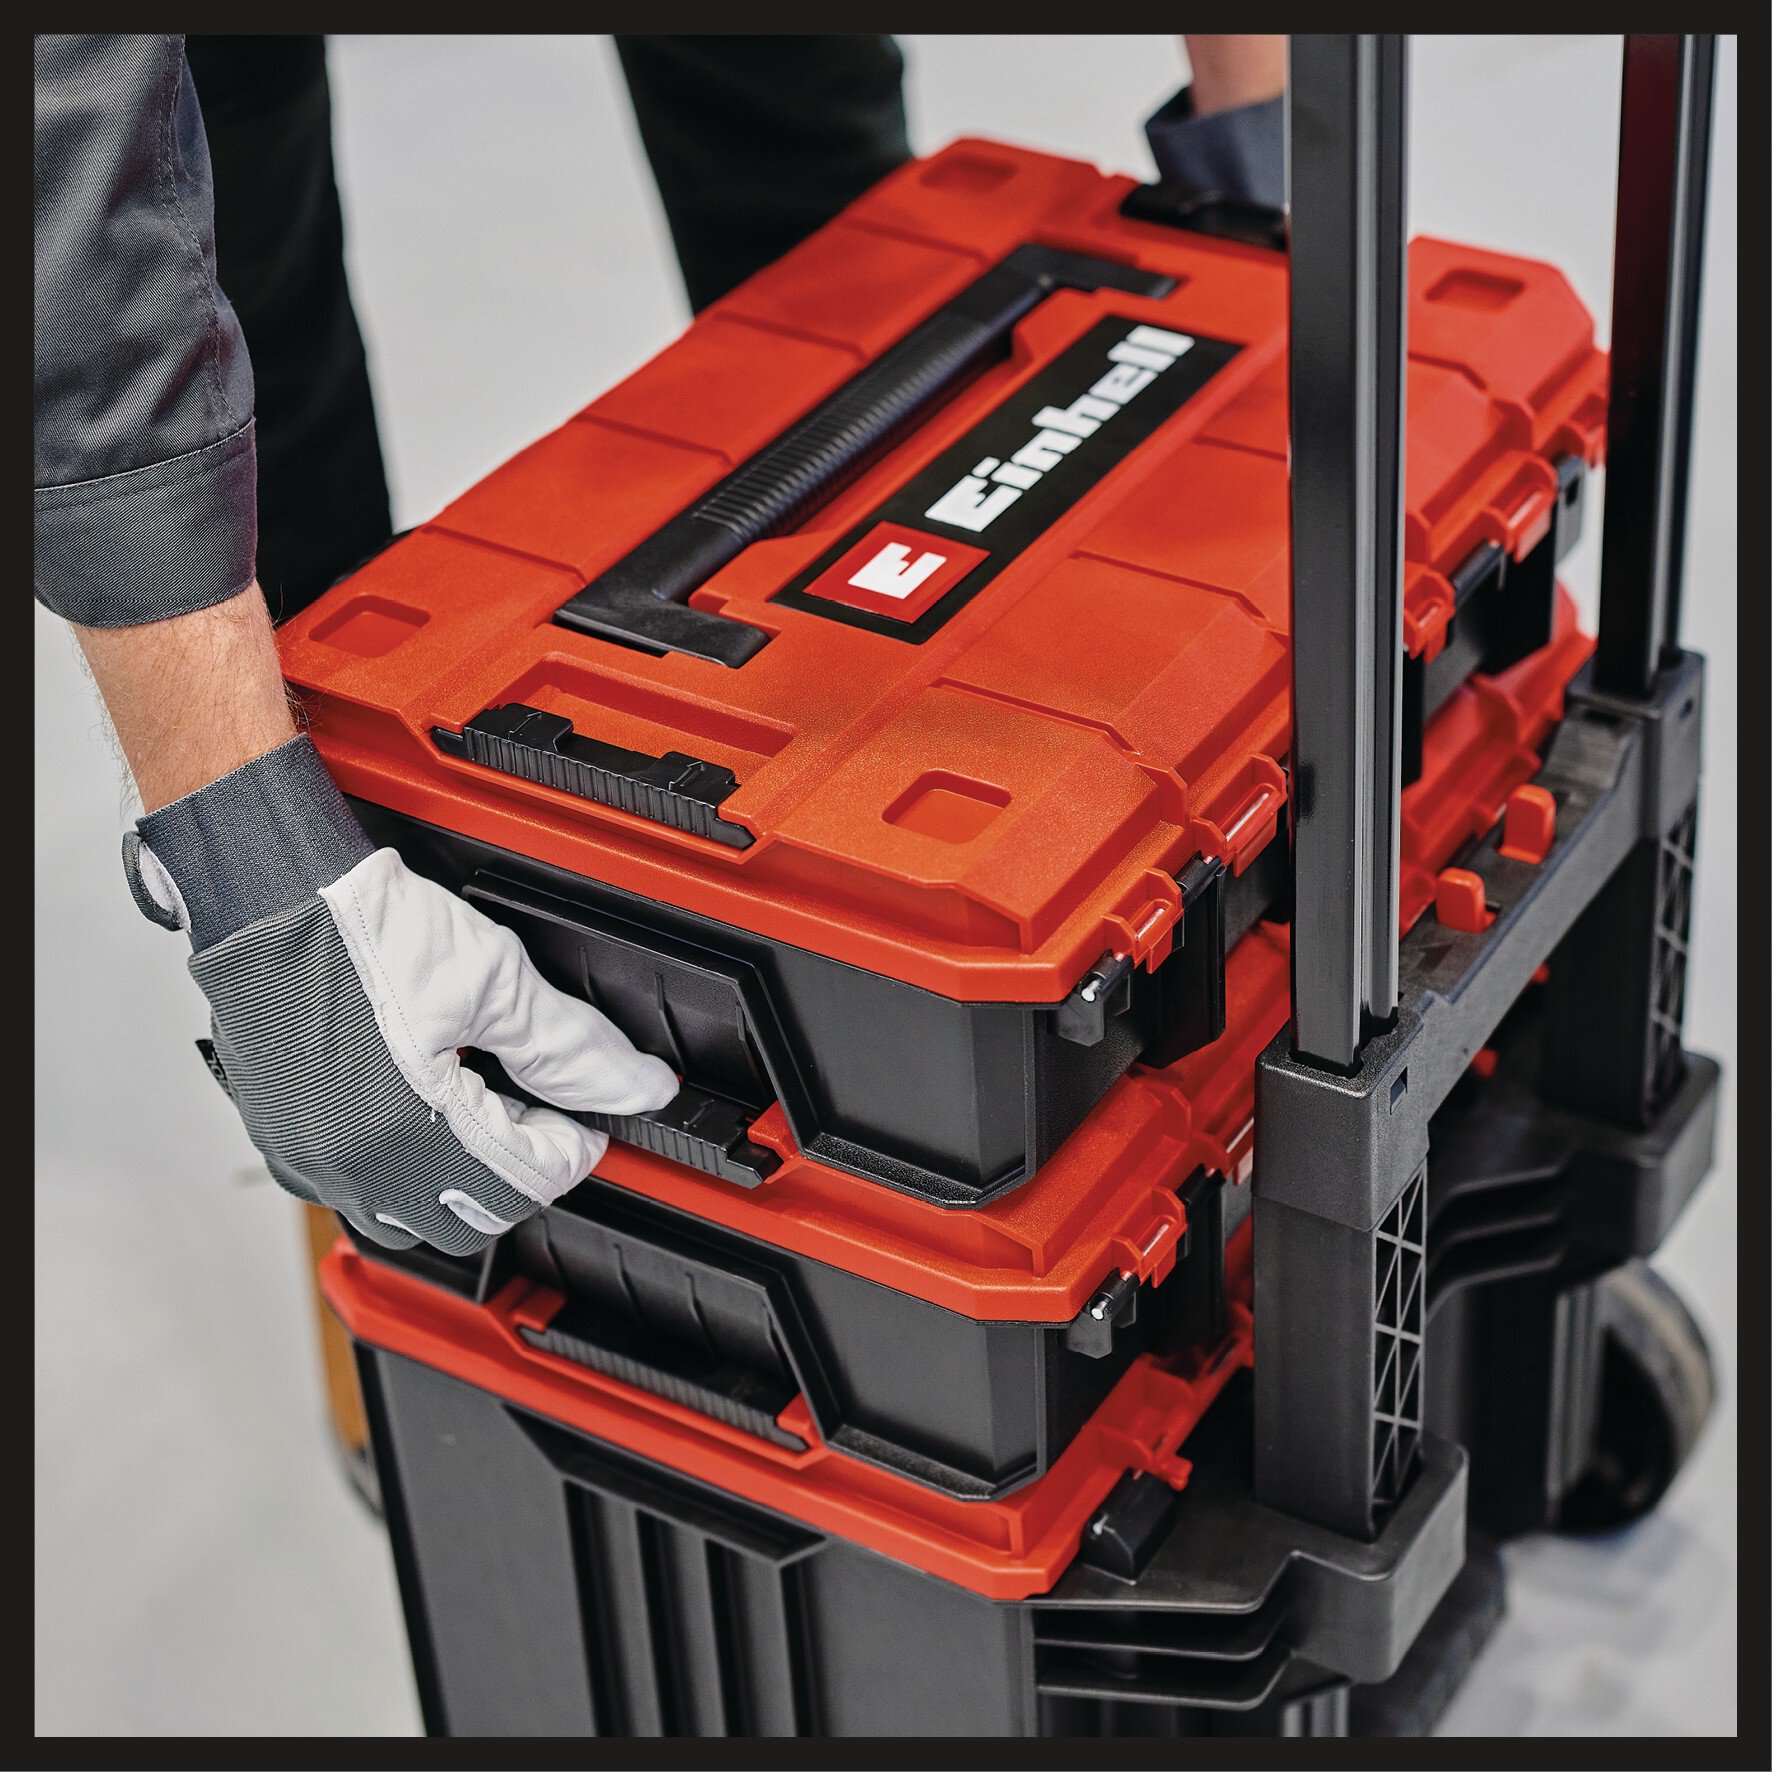 einhell-accessory-system-carrying-case-4540015-detail_image-001